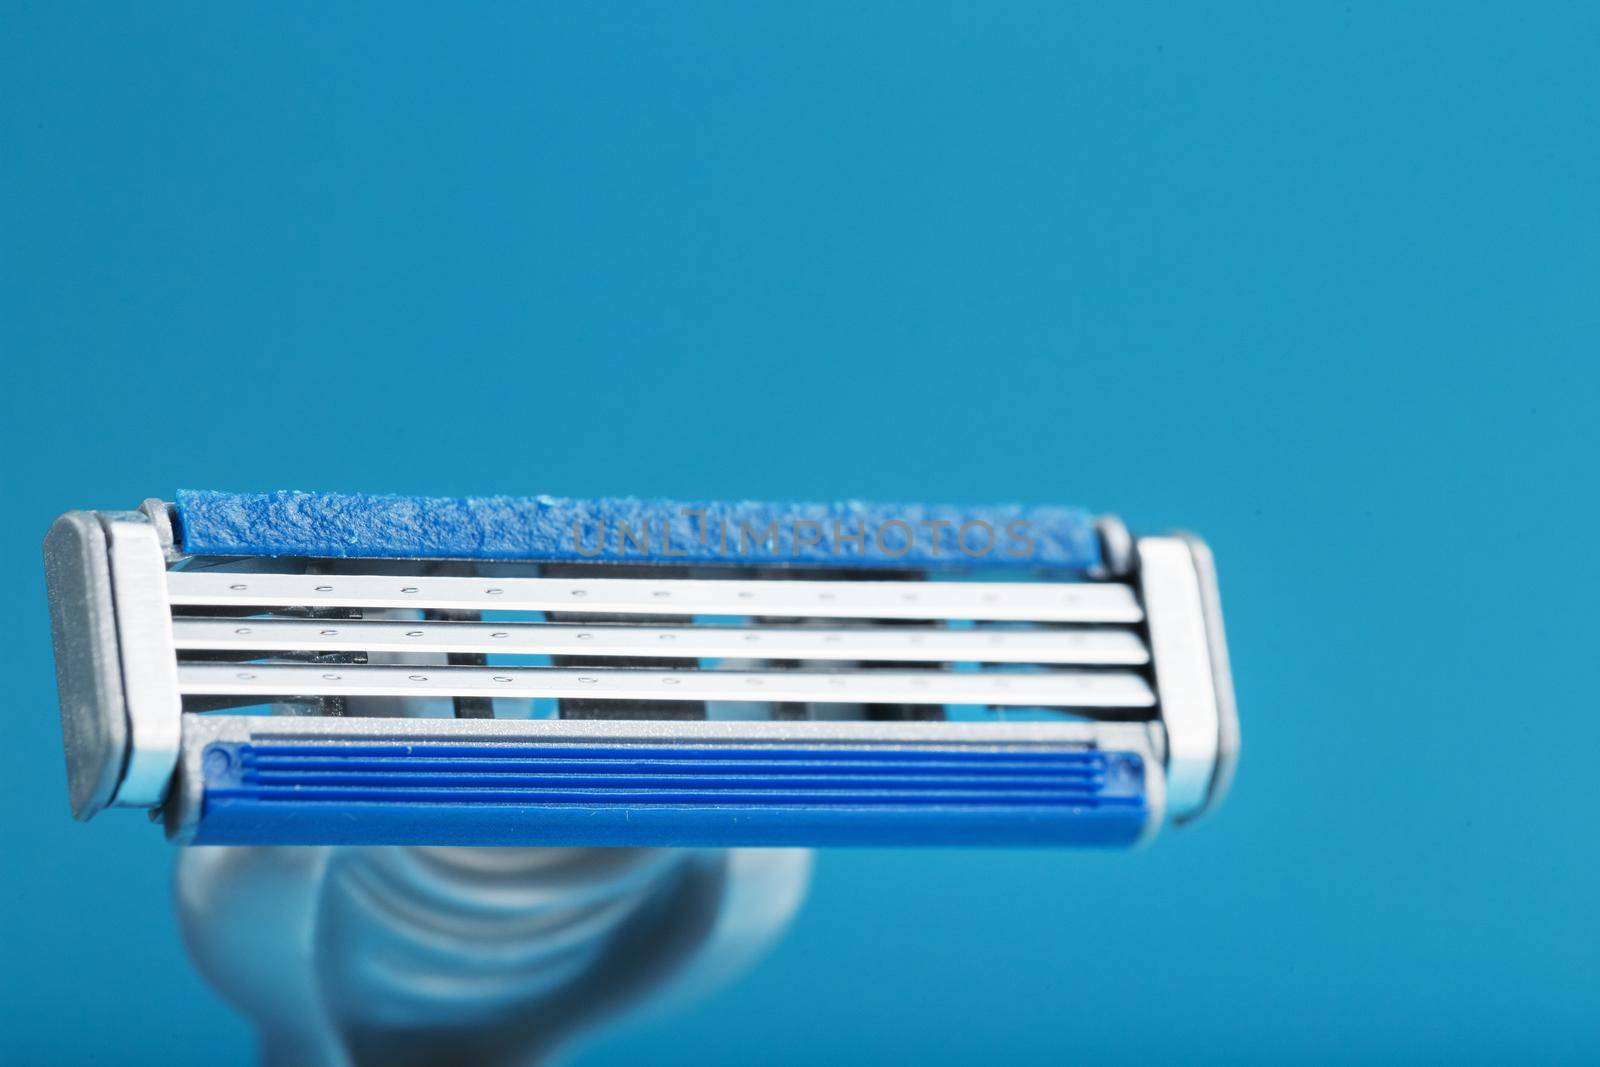 Shaving machine with three blades on a blue background close-up free space